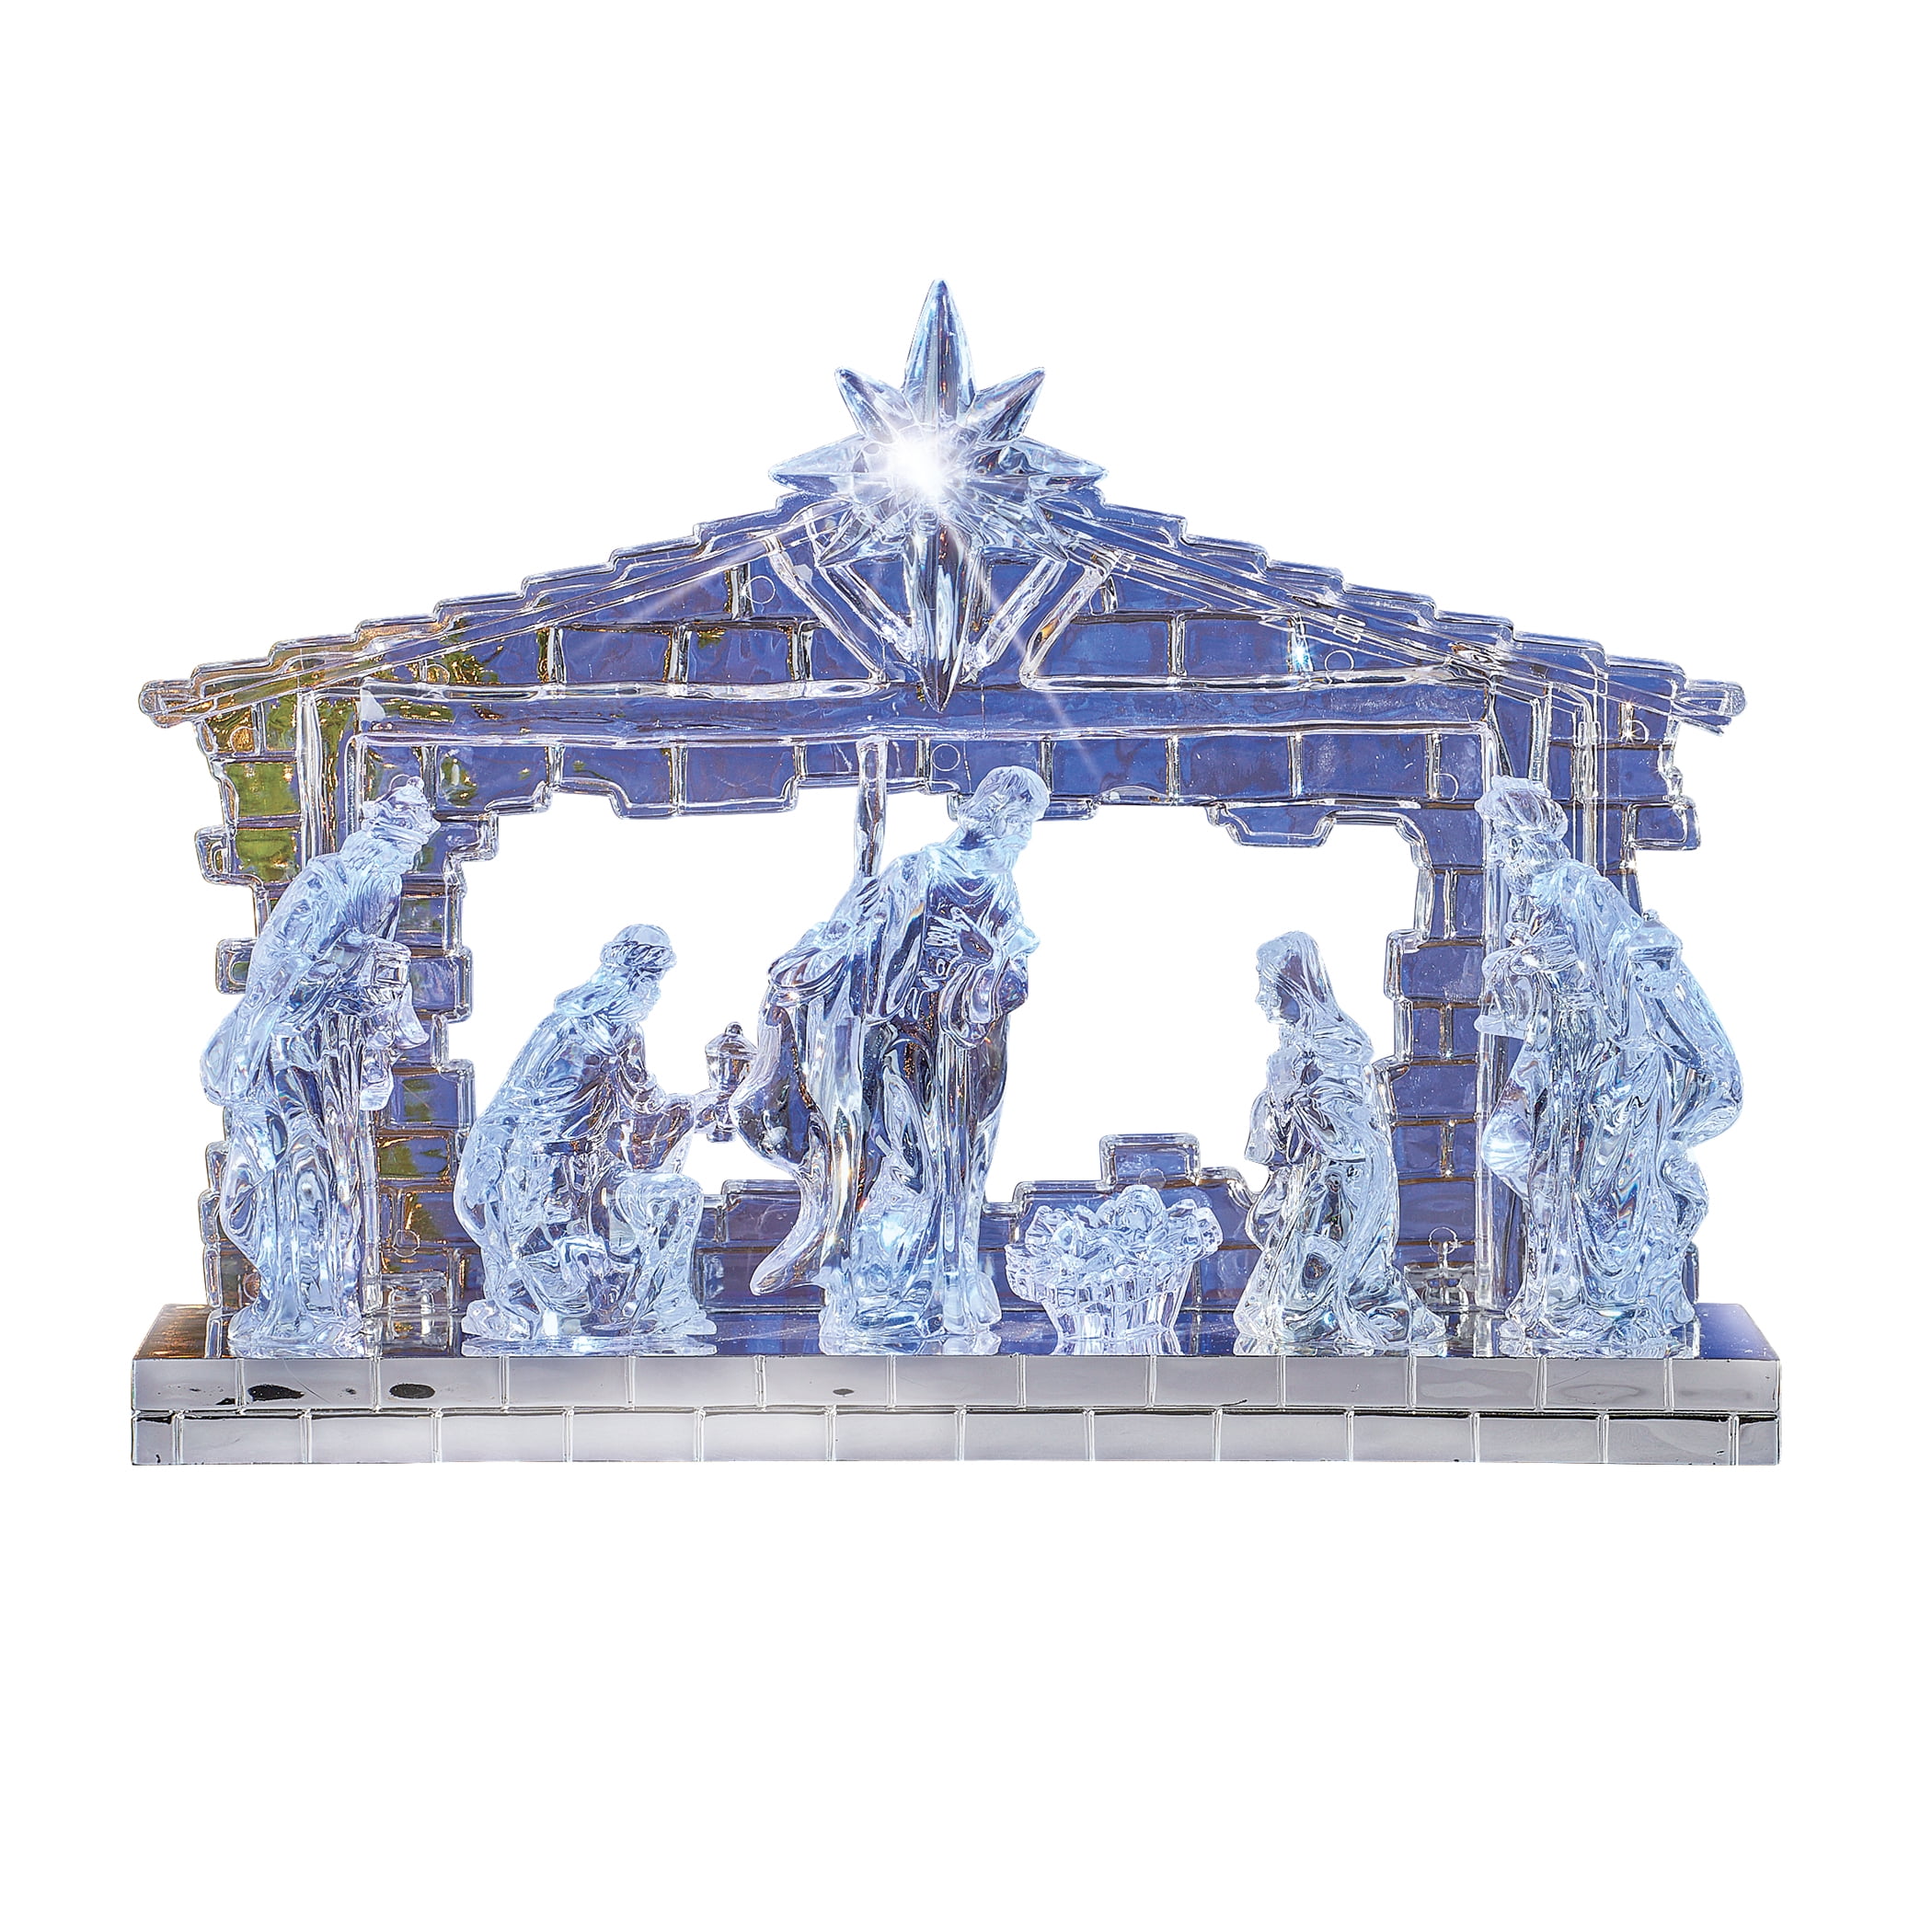 Collections Etc Lighted Joy Nativity Scene Holiday Sculpture